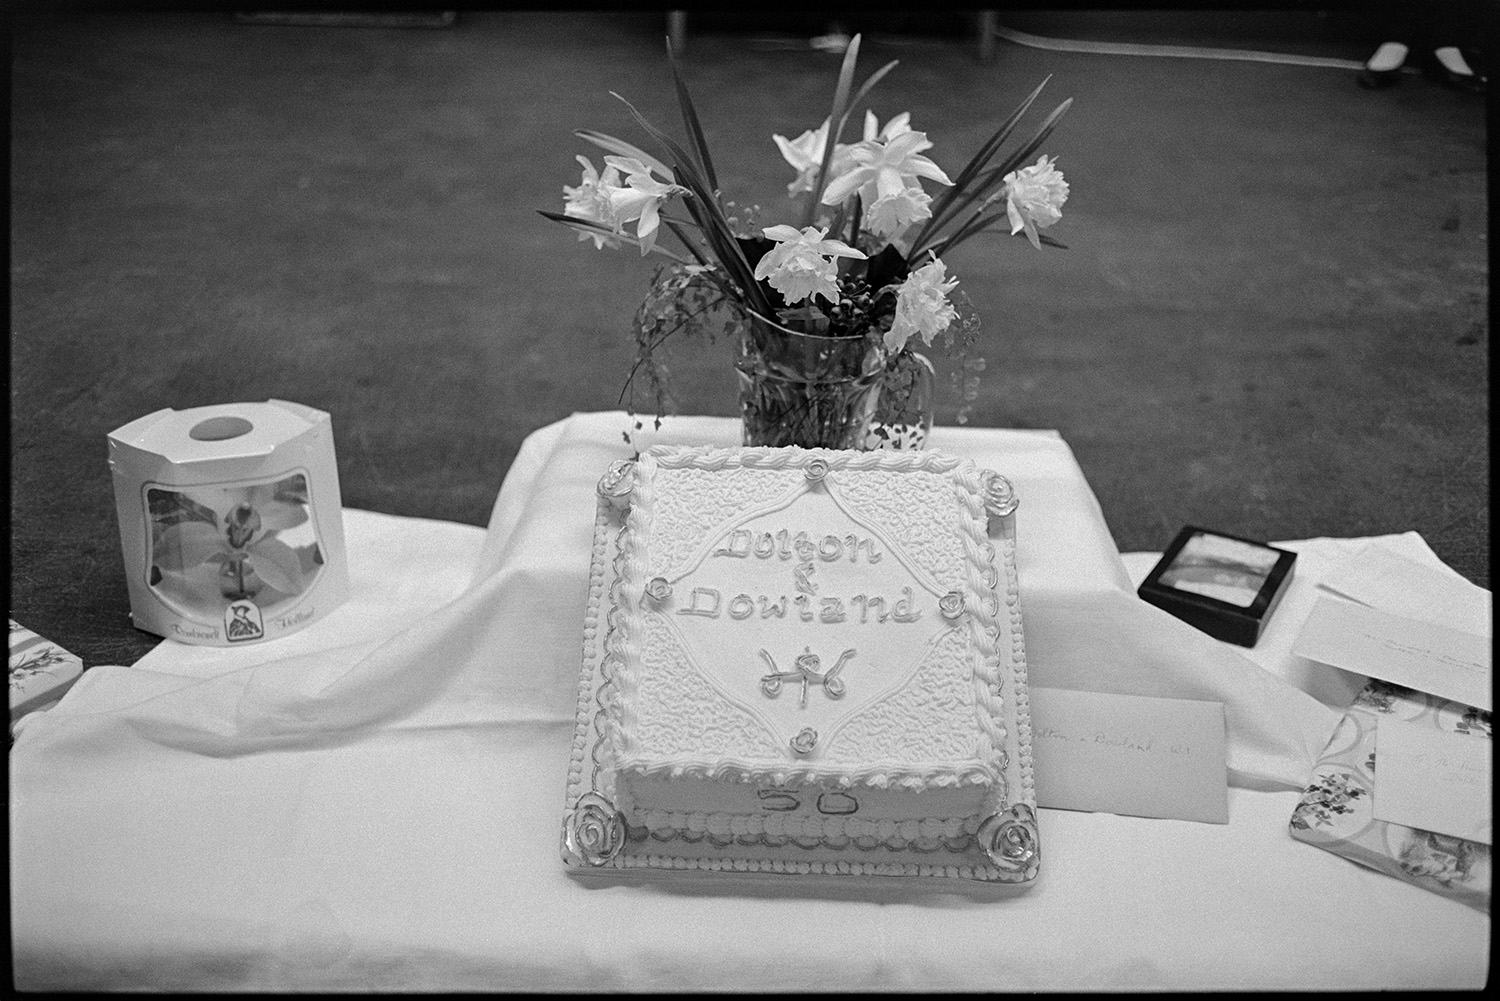 Cake for W I celebration. 
[A cake for the celebration of the fiftieth anniversary of Dolton and Dowland Women's Institute in Dolton Village Hall. A vase of flowers is behind the cake.]